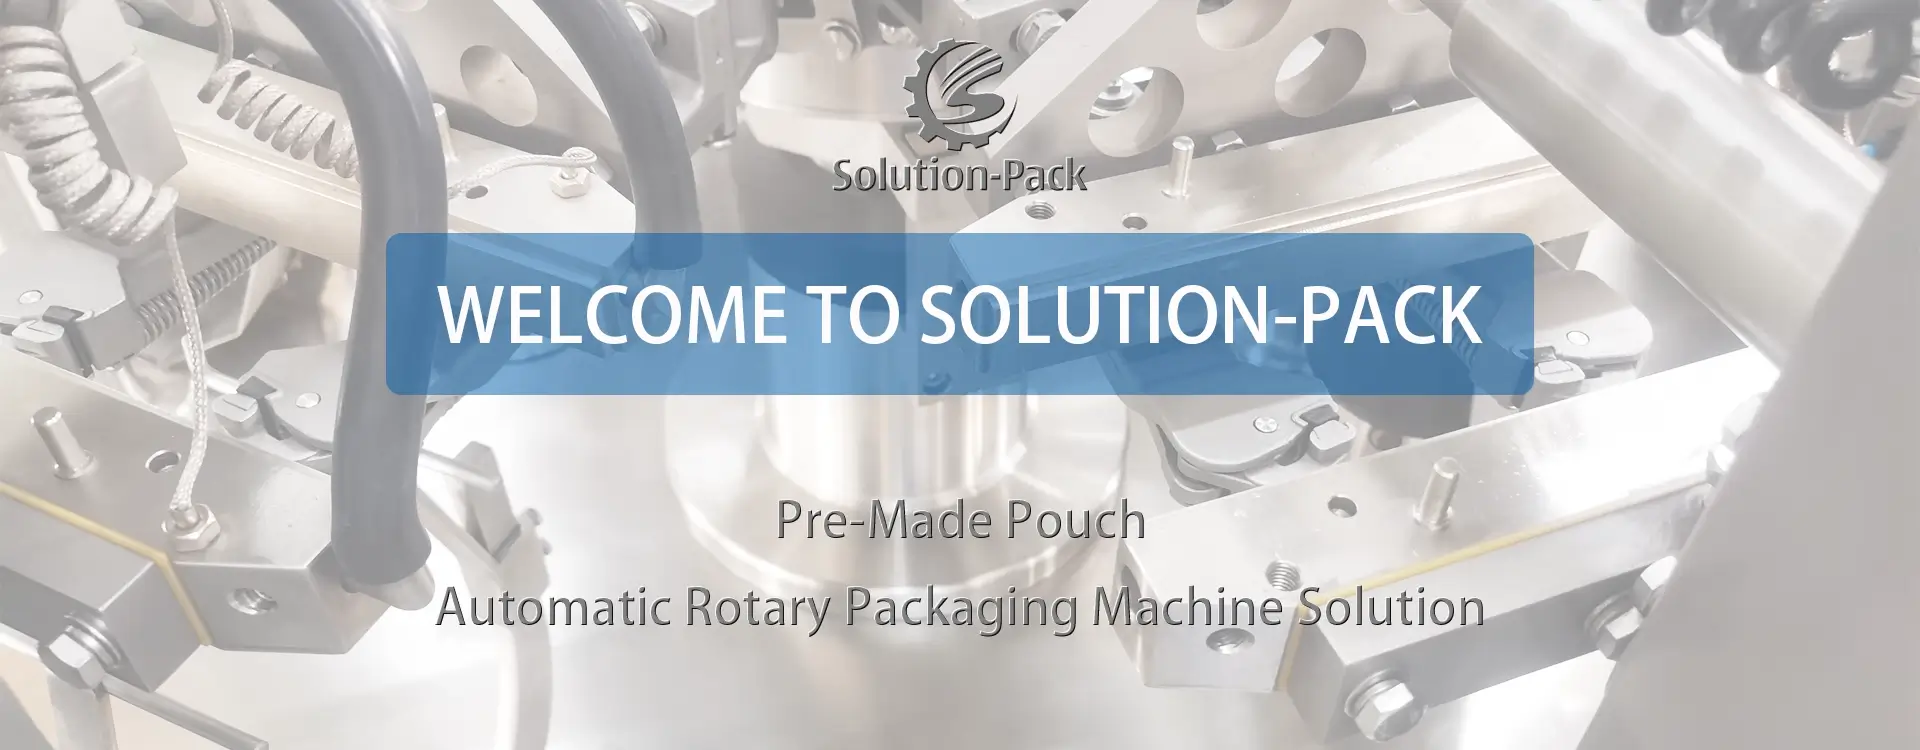 Model SP8-240P Automatic Powder Rotary Packaging Machine Solution Bottom Banner Picture | Solution-Pack